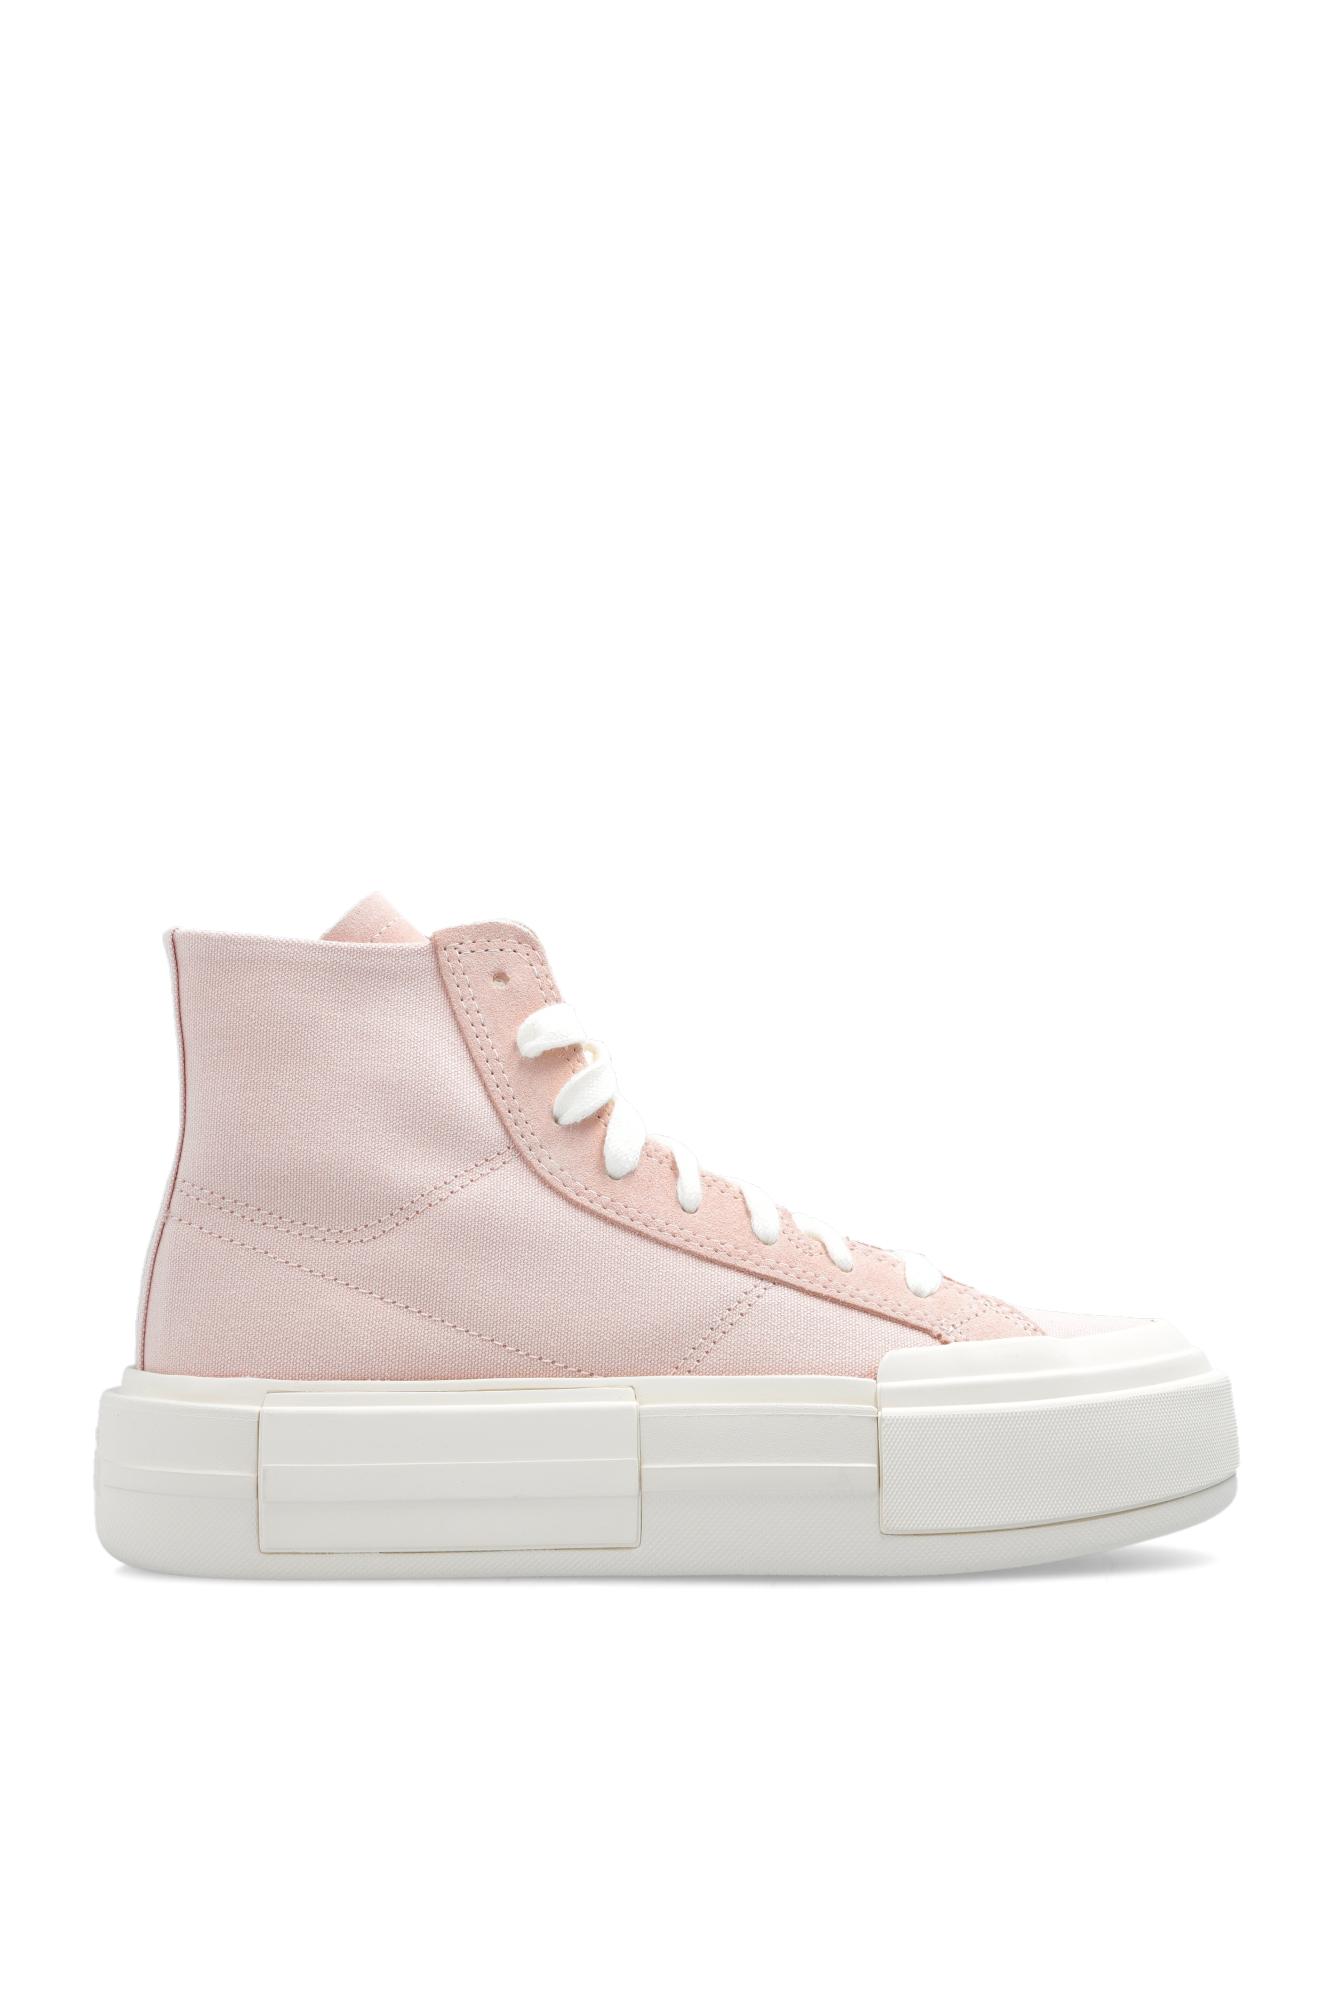 Converse 'ctas Cruise' Sneakers in Pink | Lyst